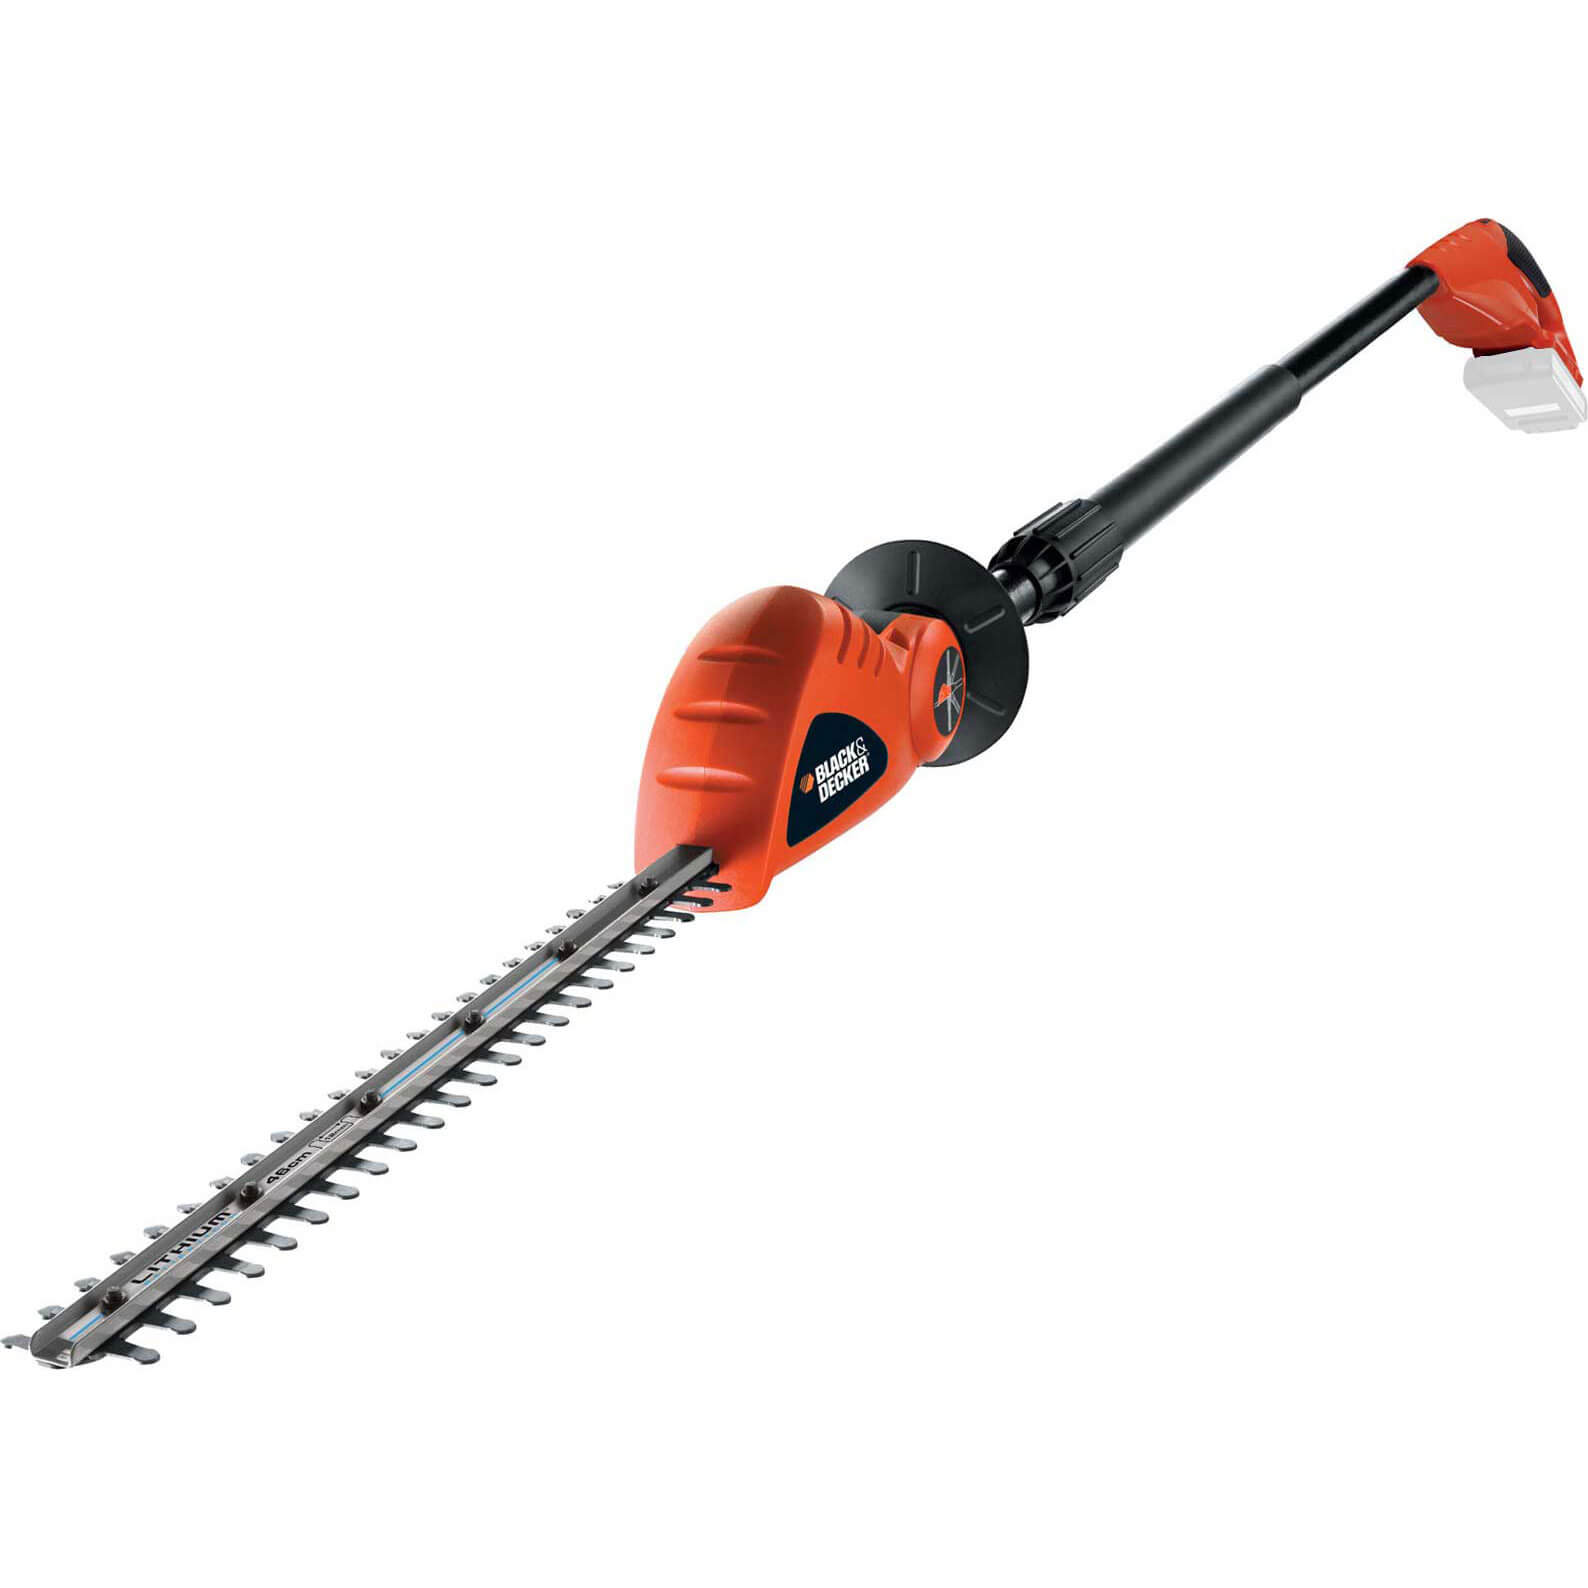 Black and Decker GTC1843L 18v Cordless Long Articulating Hedge Trimmer 430mm No Batteries No Charger